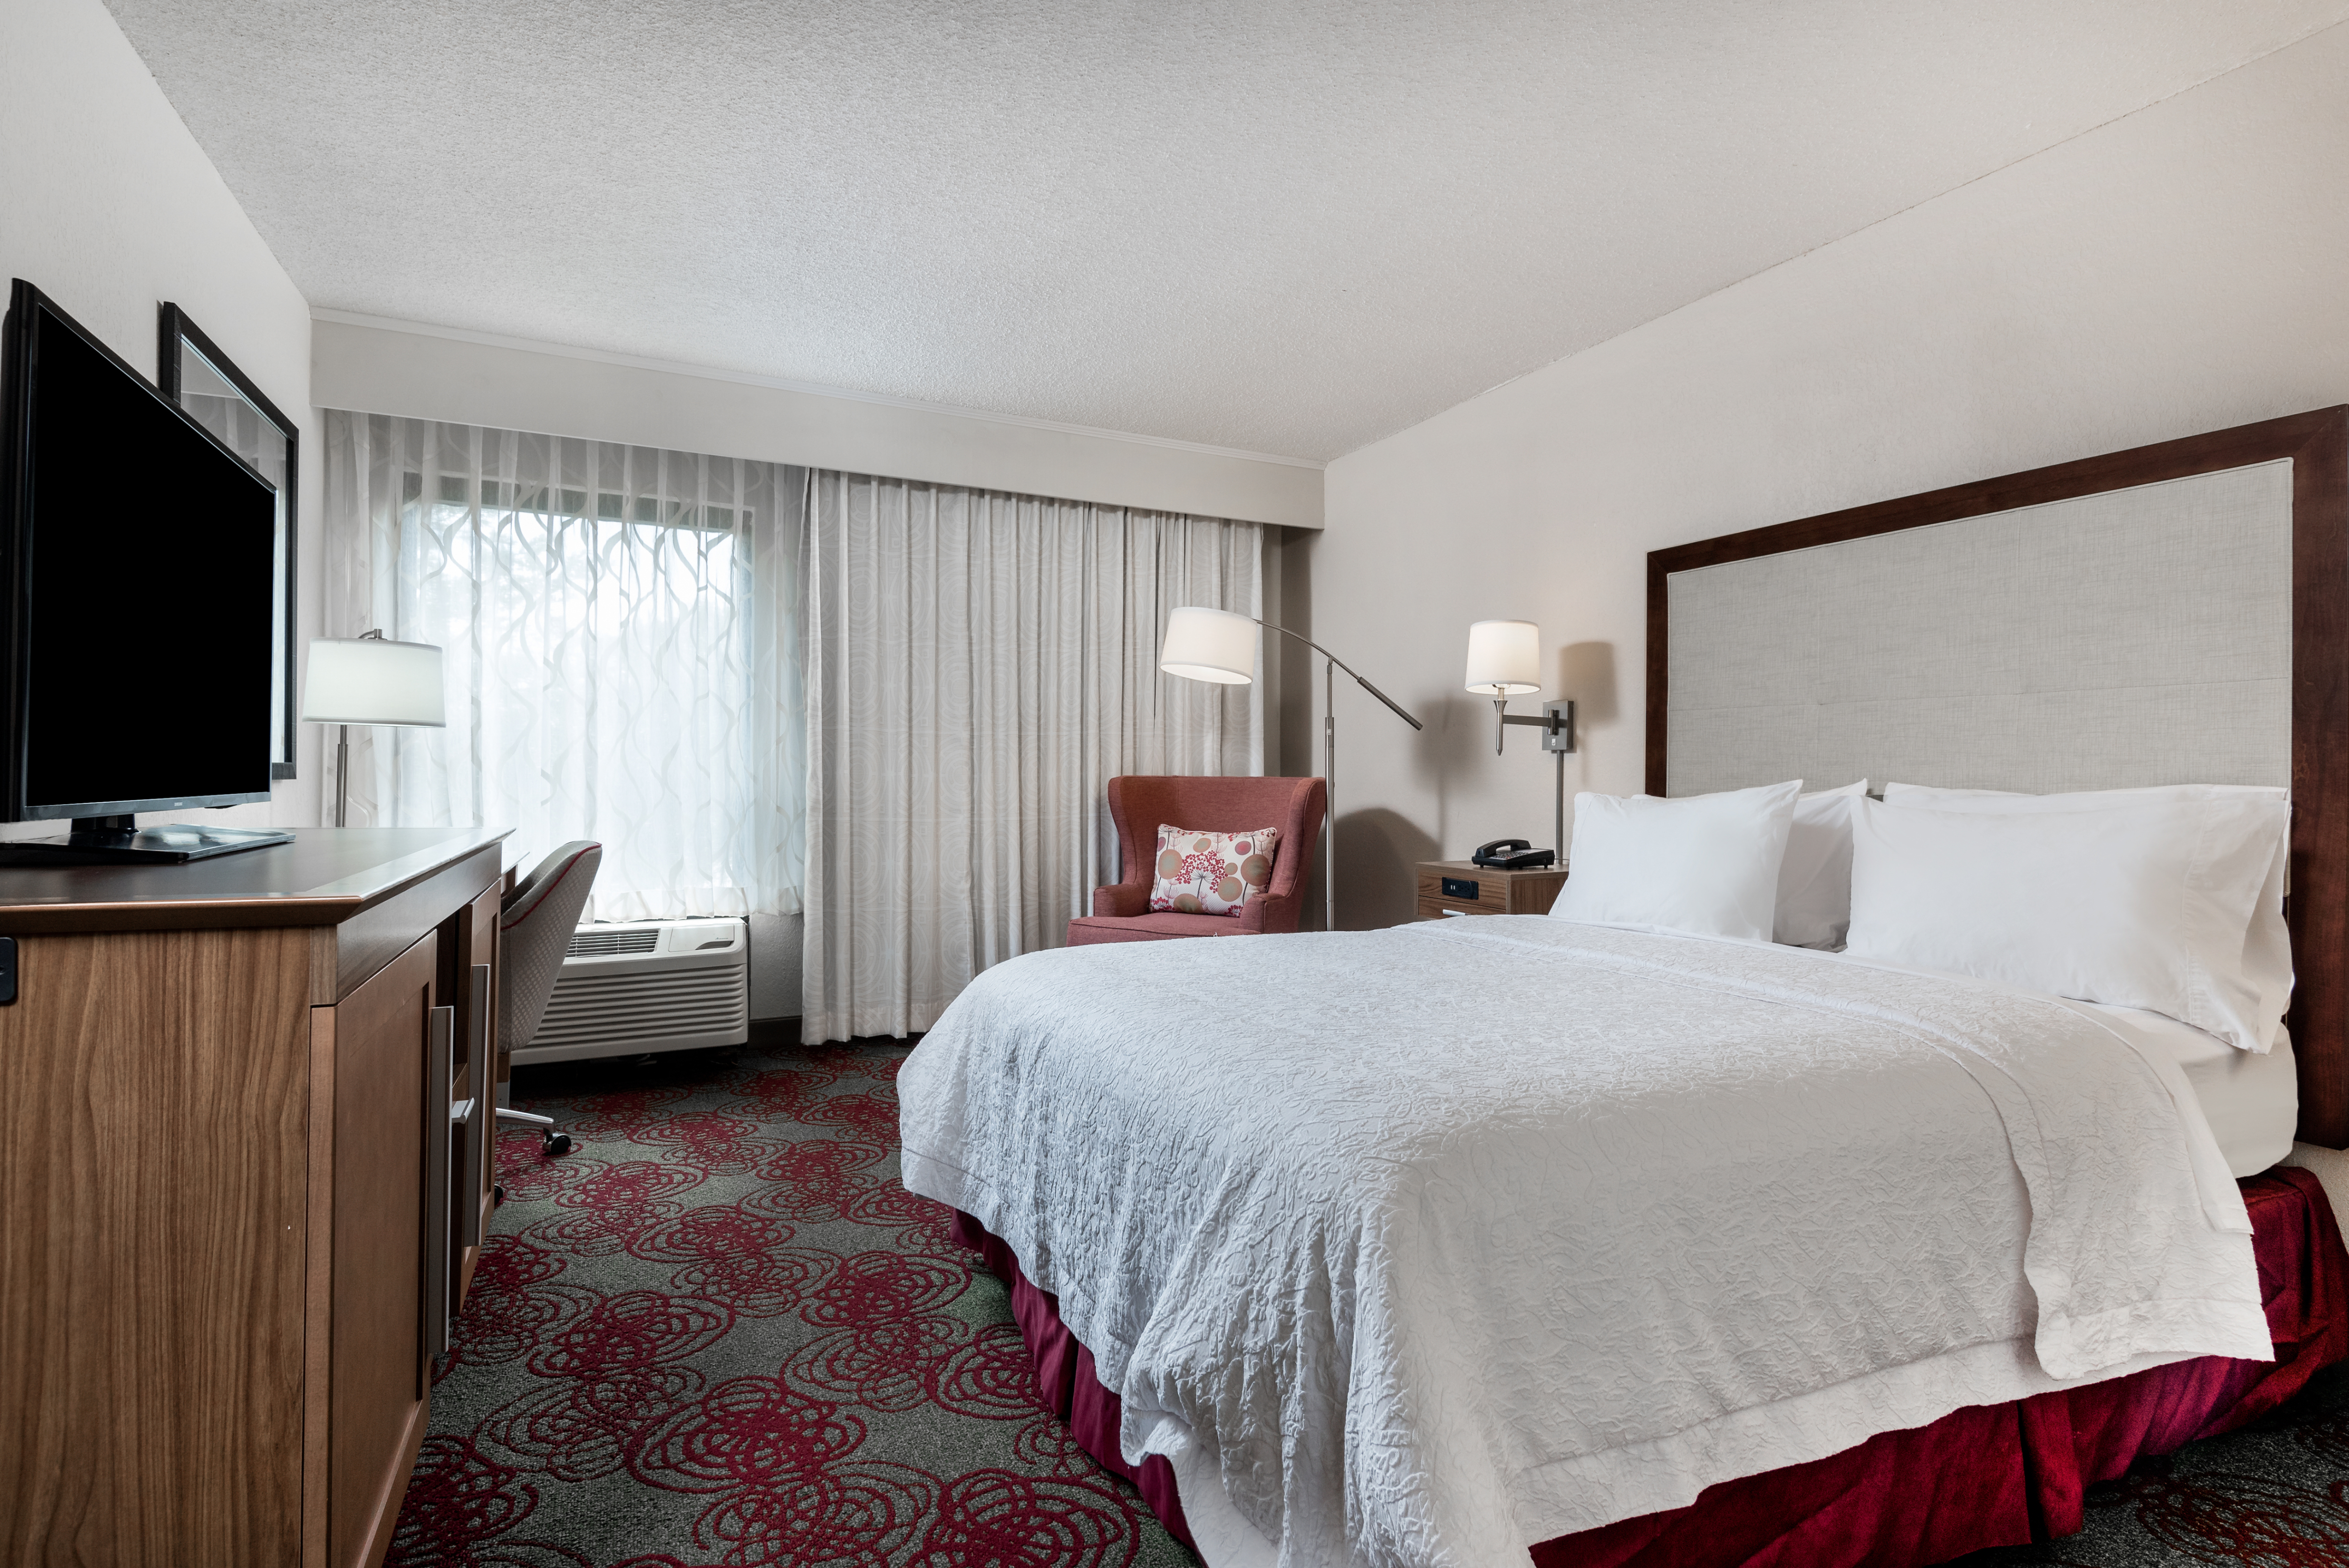 One Queen Accessible Guest Room with HDTV Desk and Chair